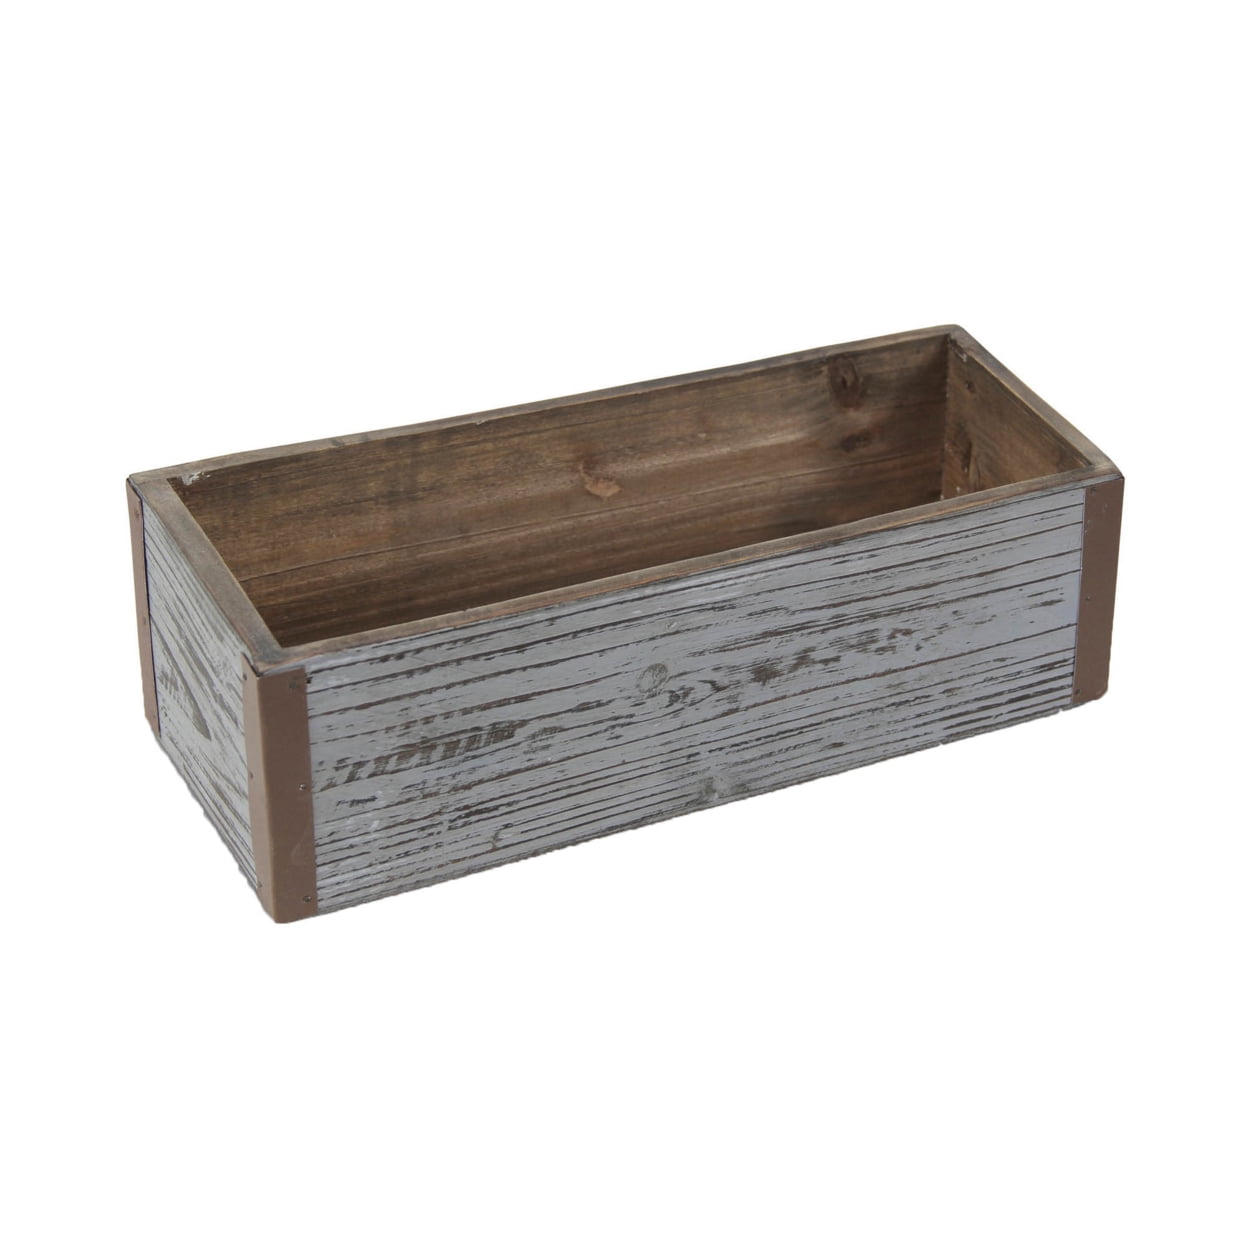 UPC 785853000123 product image for 4911-12GW Gray Wash Wooden Rectangular Planter with Metal Corner Accents | upcitemdb.com